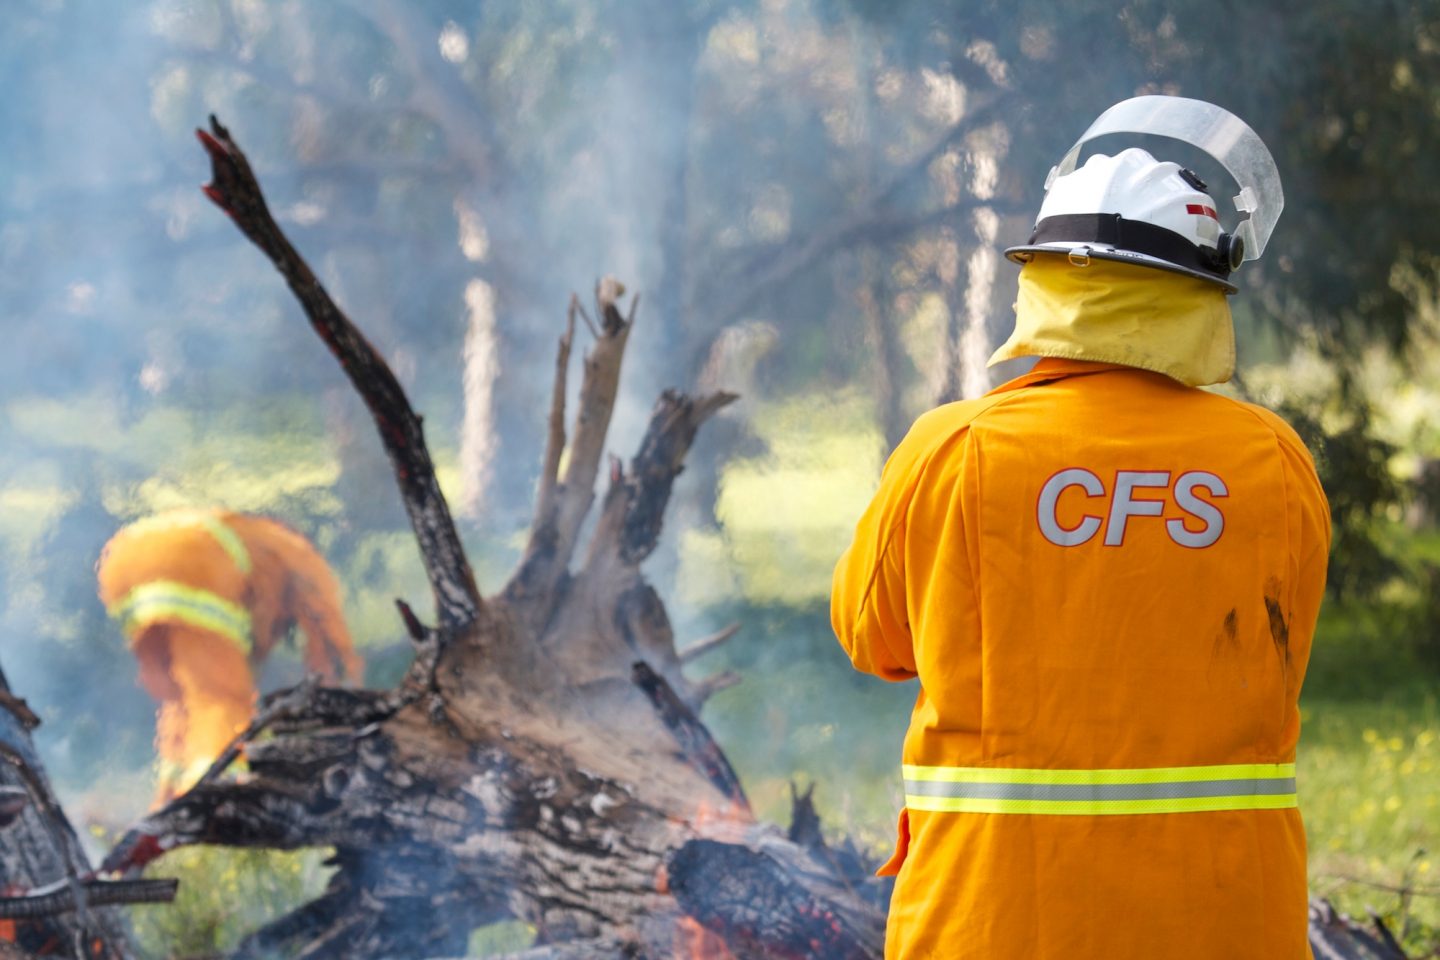 CFS crew members at a burnoff, important work that has become more difficult as fire seasons grow longer